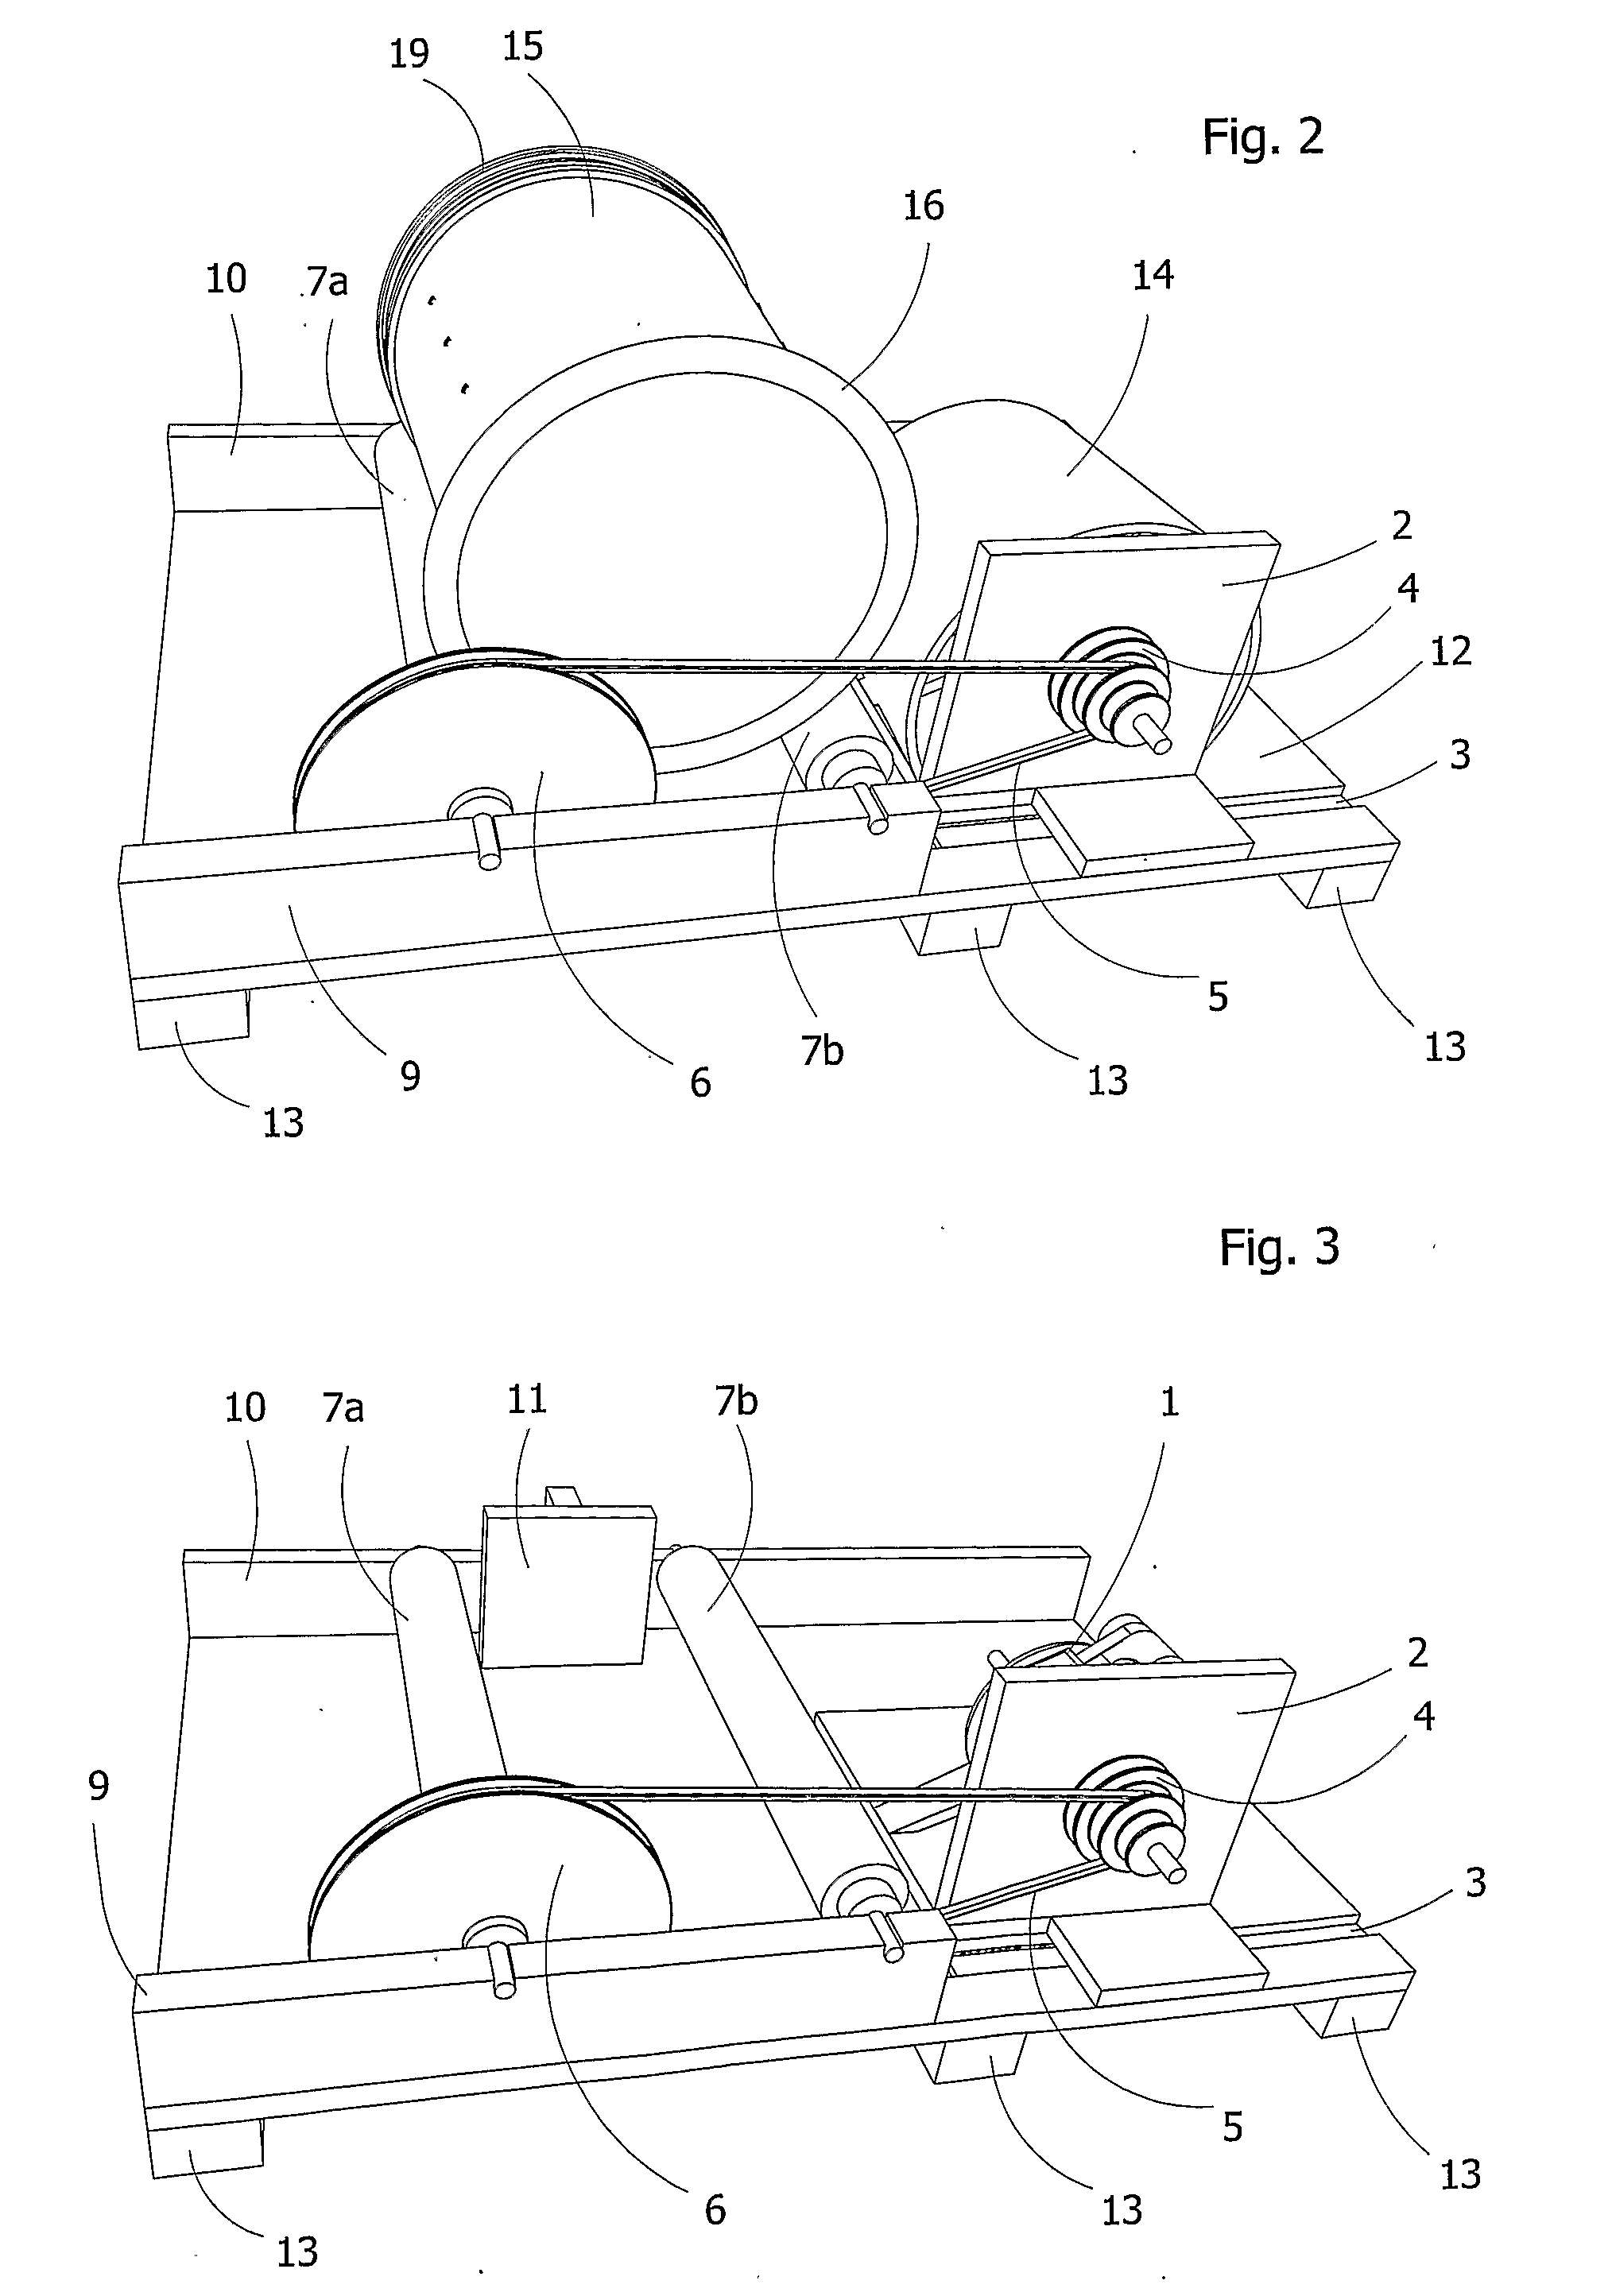 Method and Apparatus for Felting Three Dimensional Objects